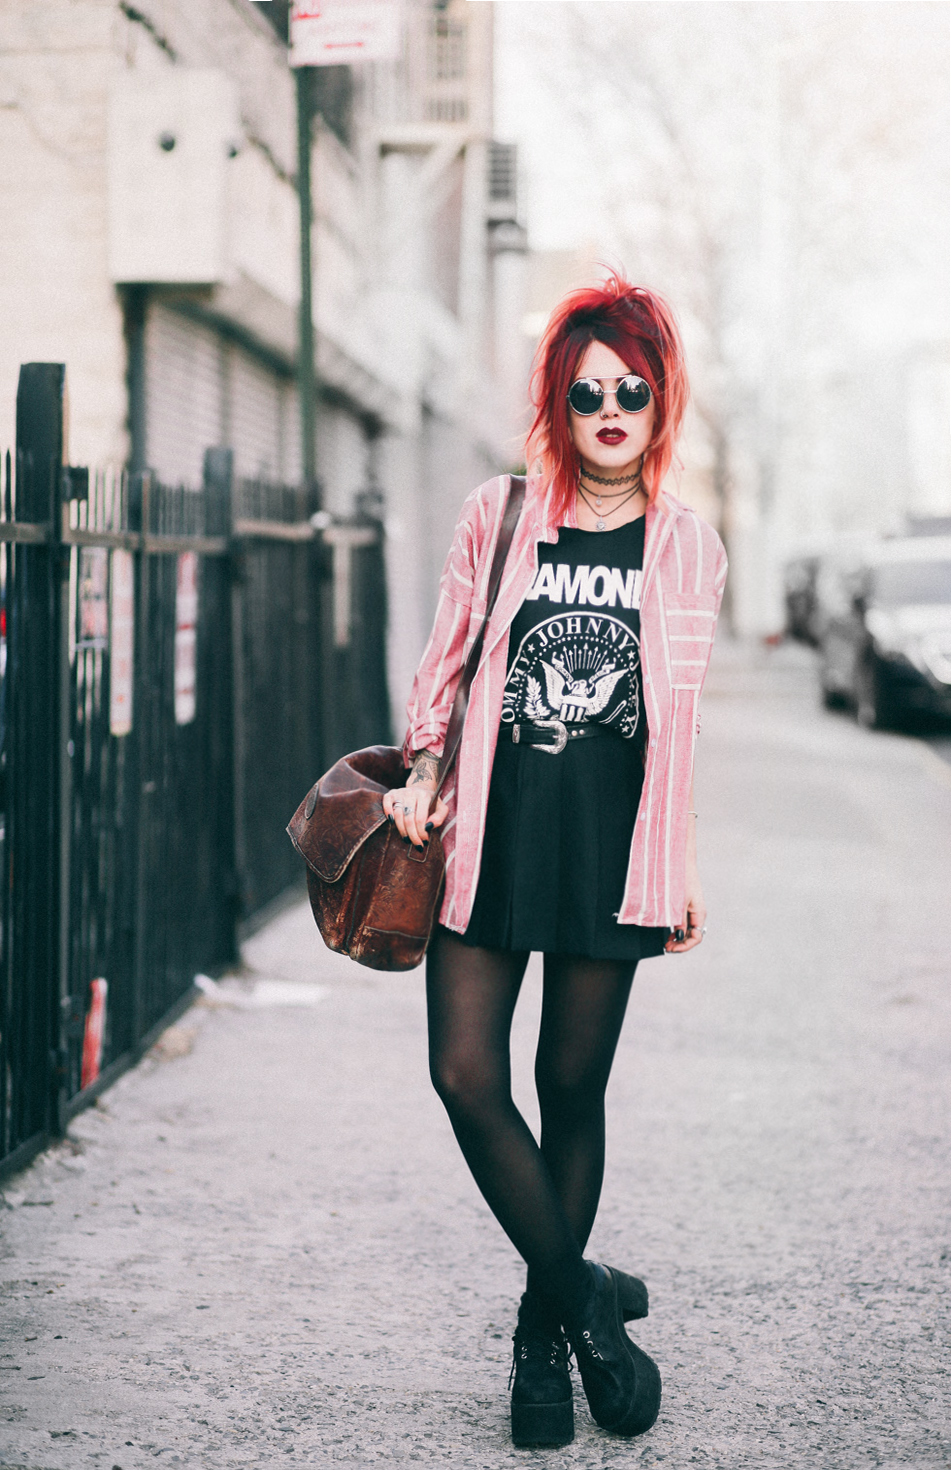 Le Happy wearing Ramones t-shirt and a plaid skirt